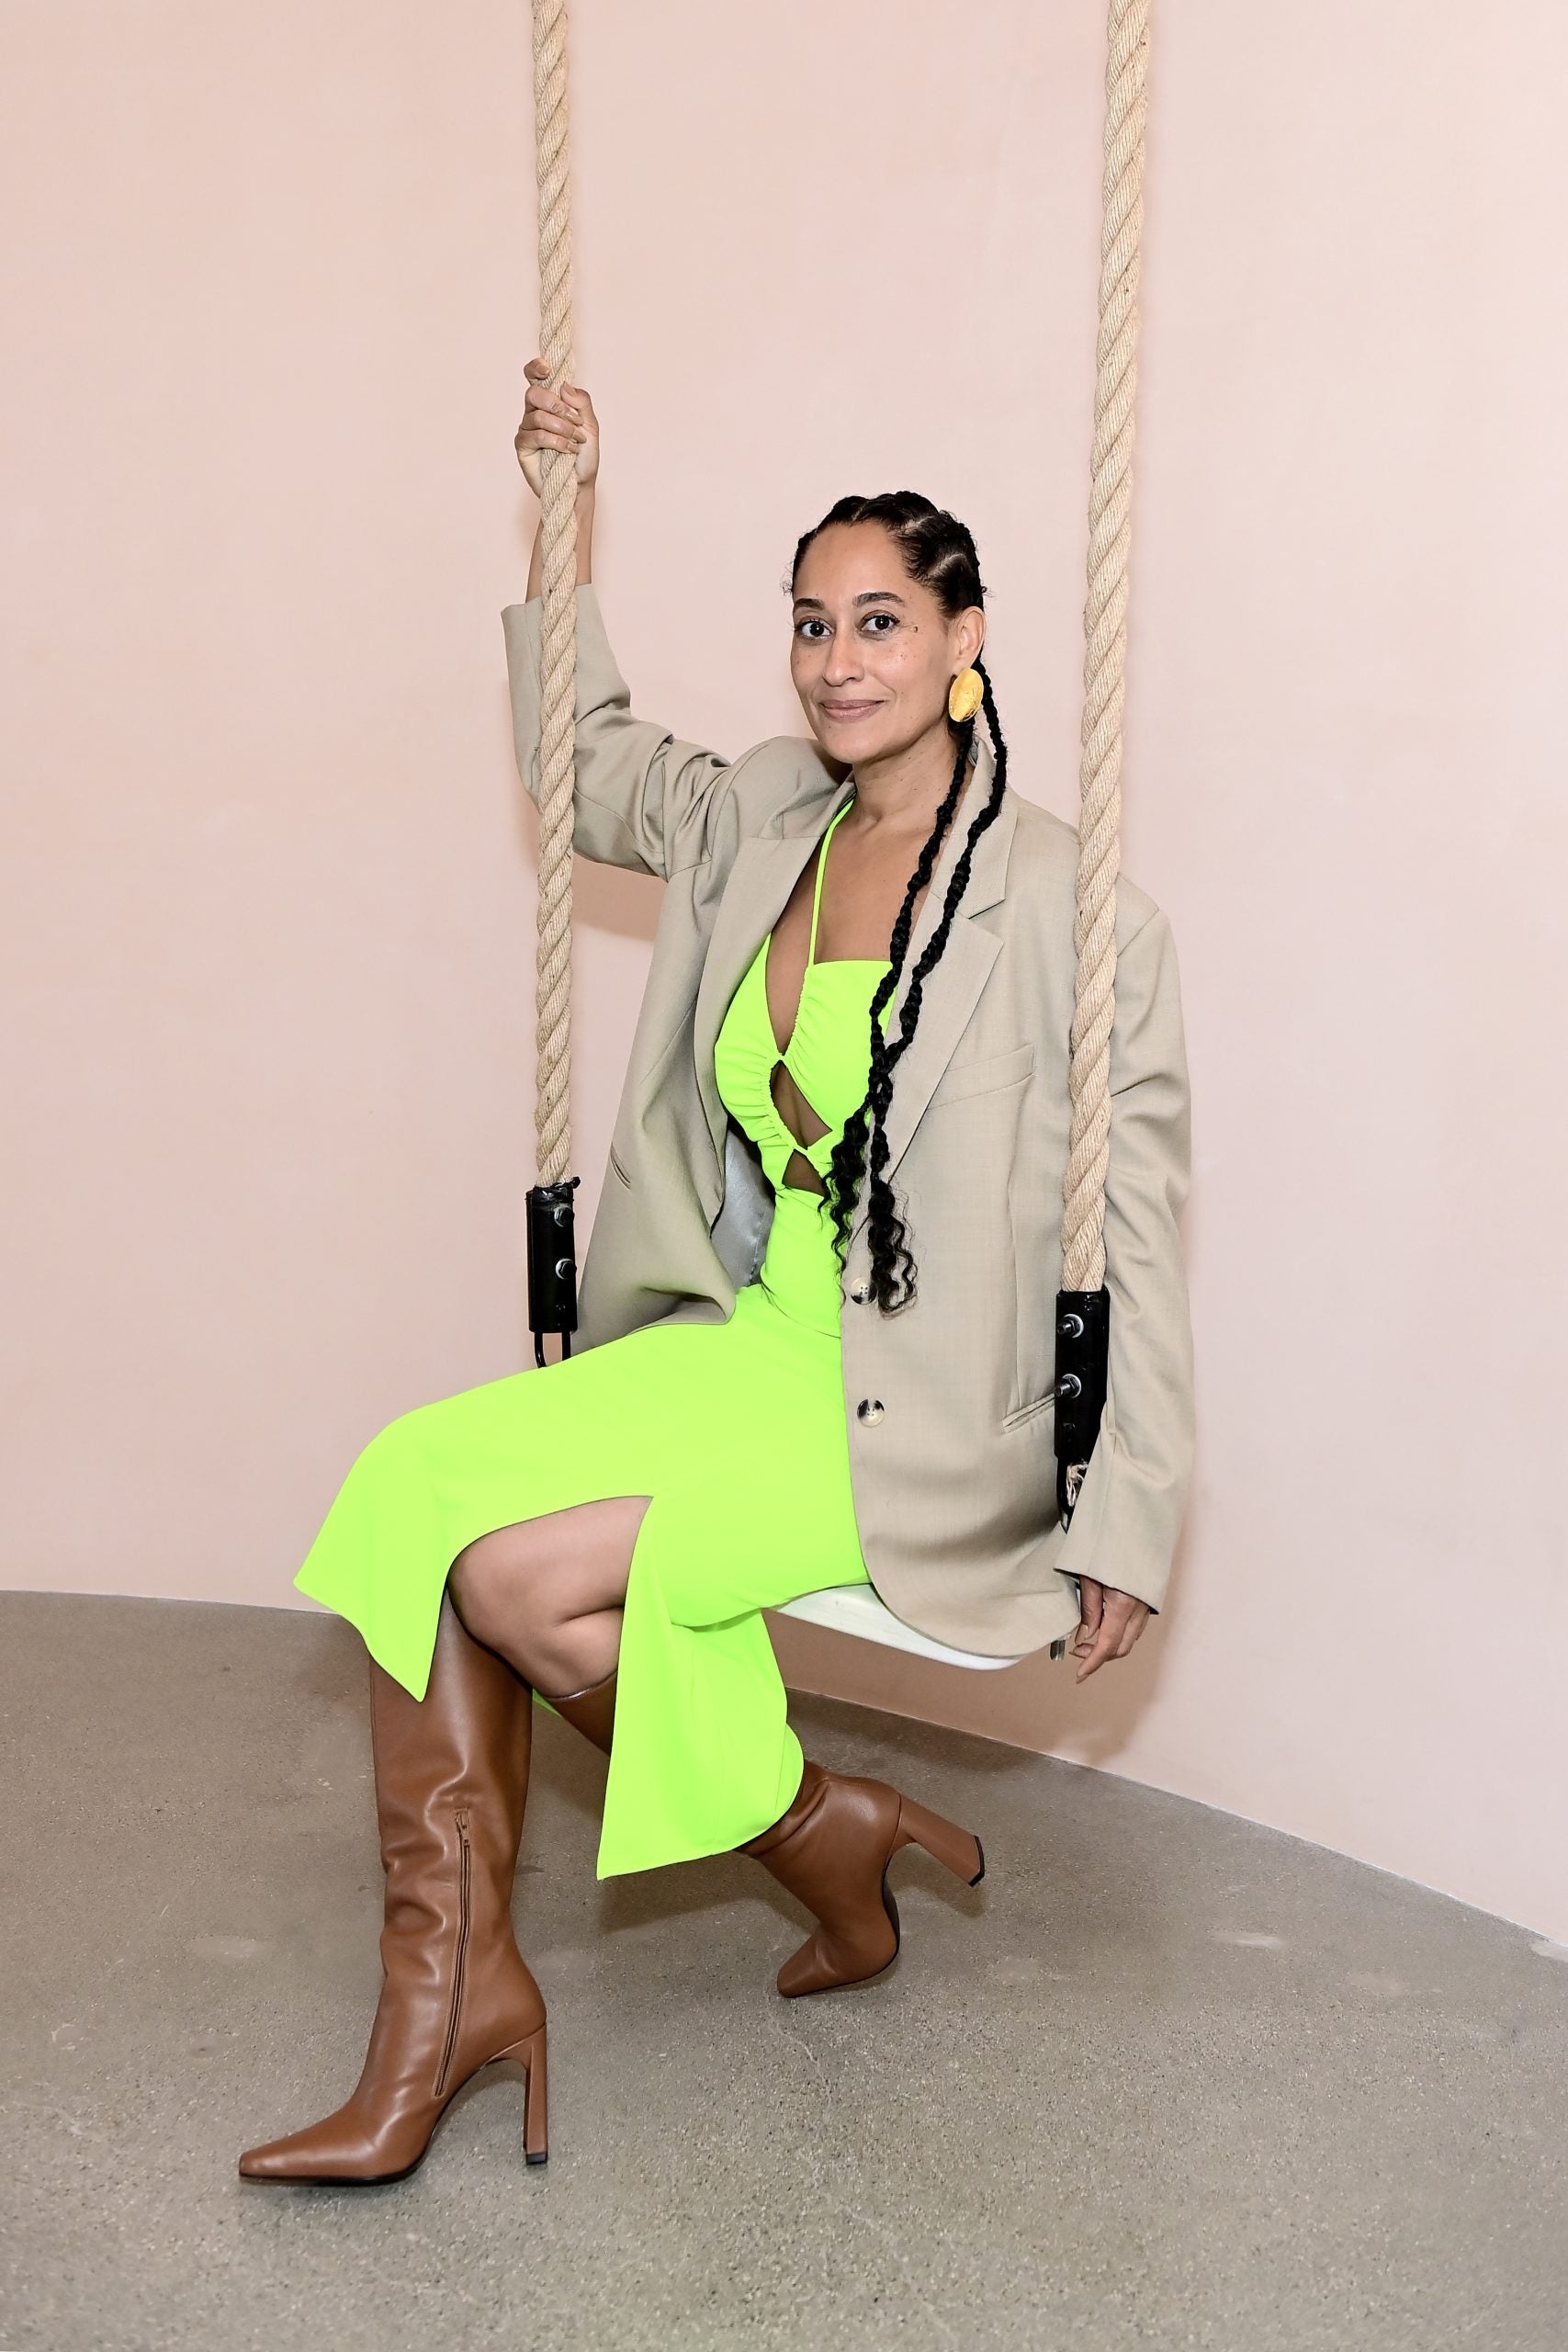 Exclusive: Tracee Ellis Ross Is the 2022 Ambassador For H&M’s Partnership With Buy From A Black Woman